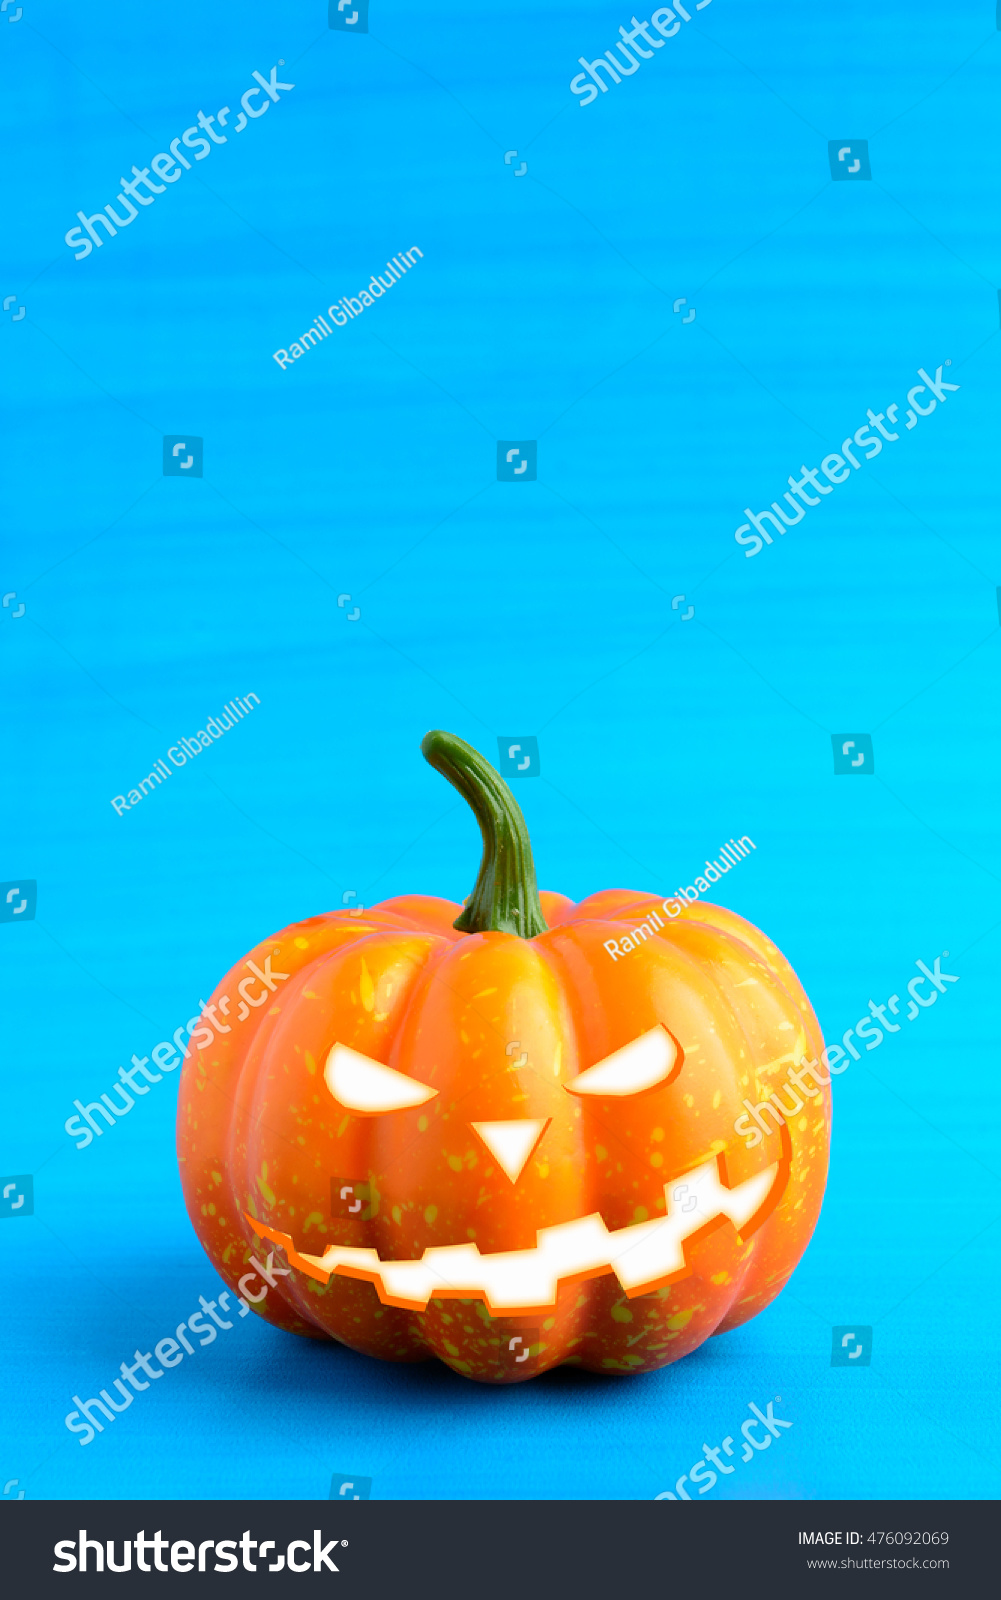 Three Halloween pumpkin with scary face on a blue background #476092069